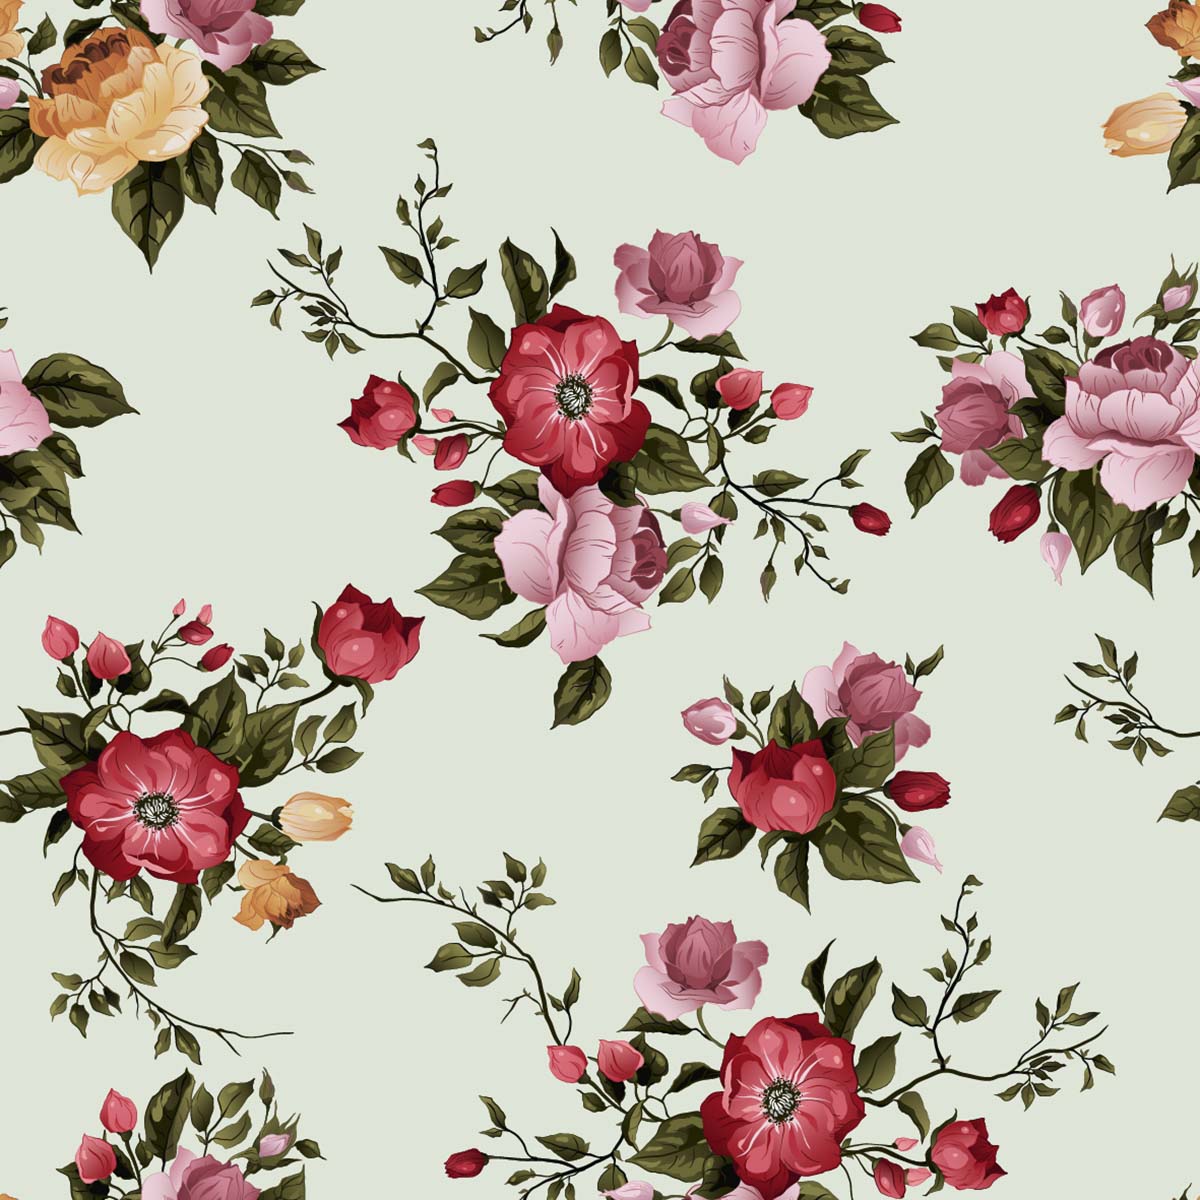 A pattern of flowers on a light background